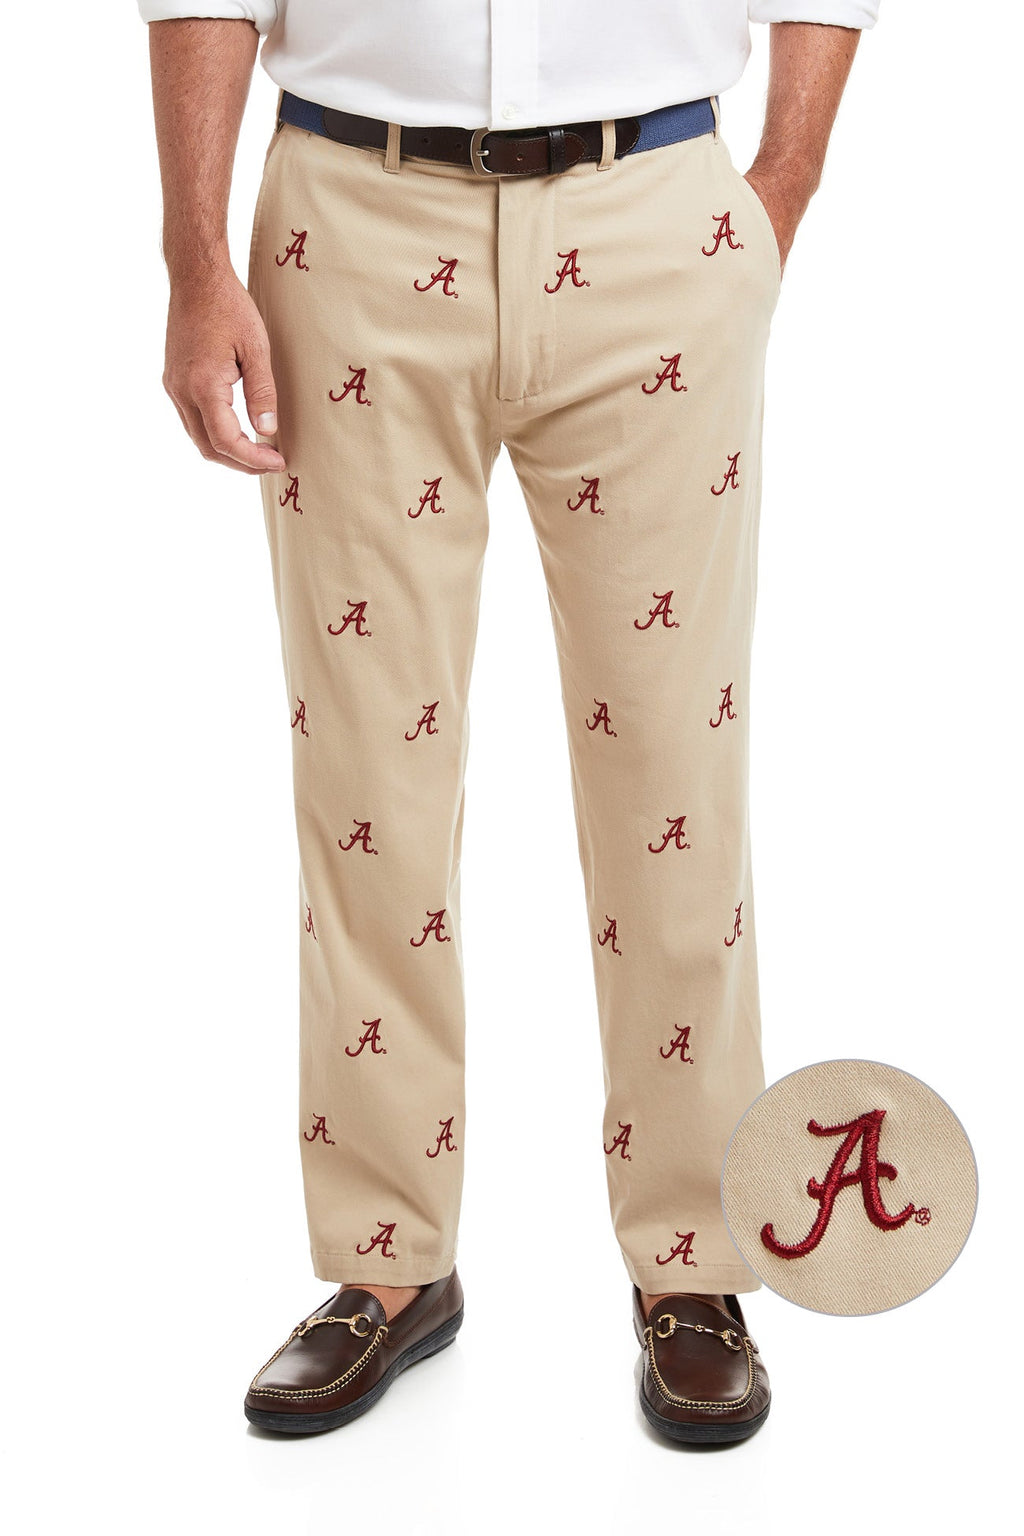 Collegiate Stretch Twill Pant Khaki with Alabama MENS EMBROIDERED PANTS Castaway Nantucket Island